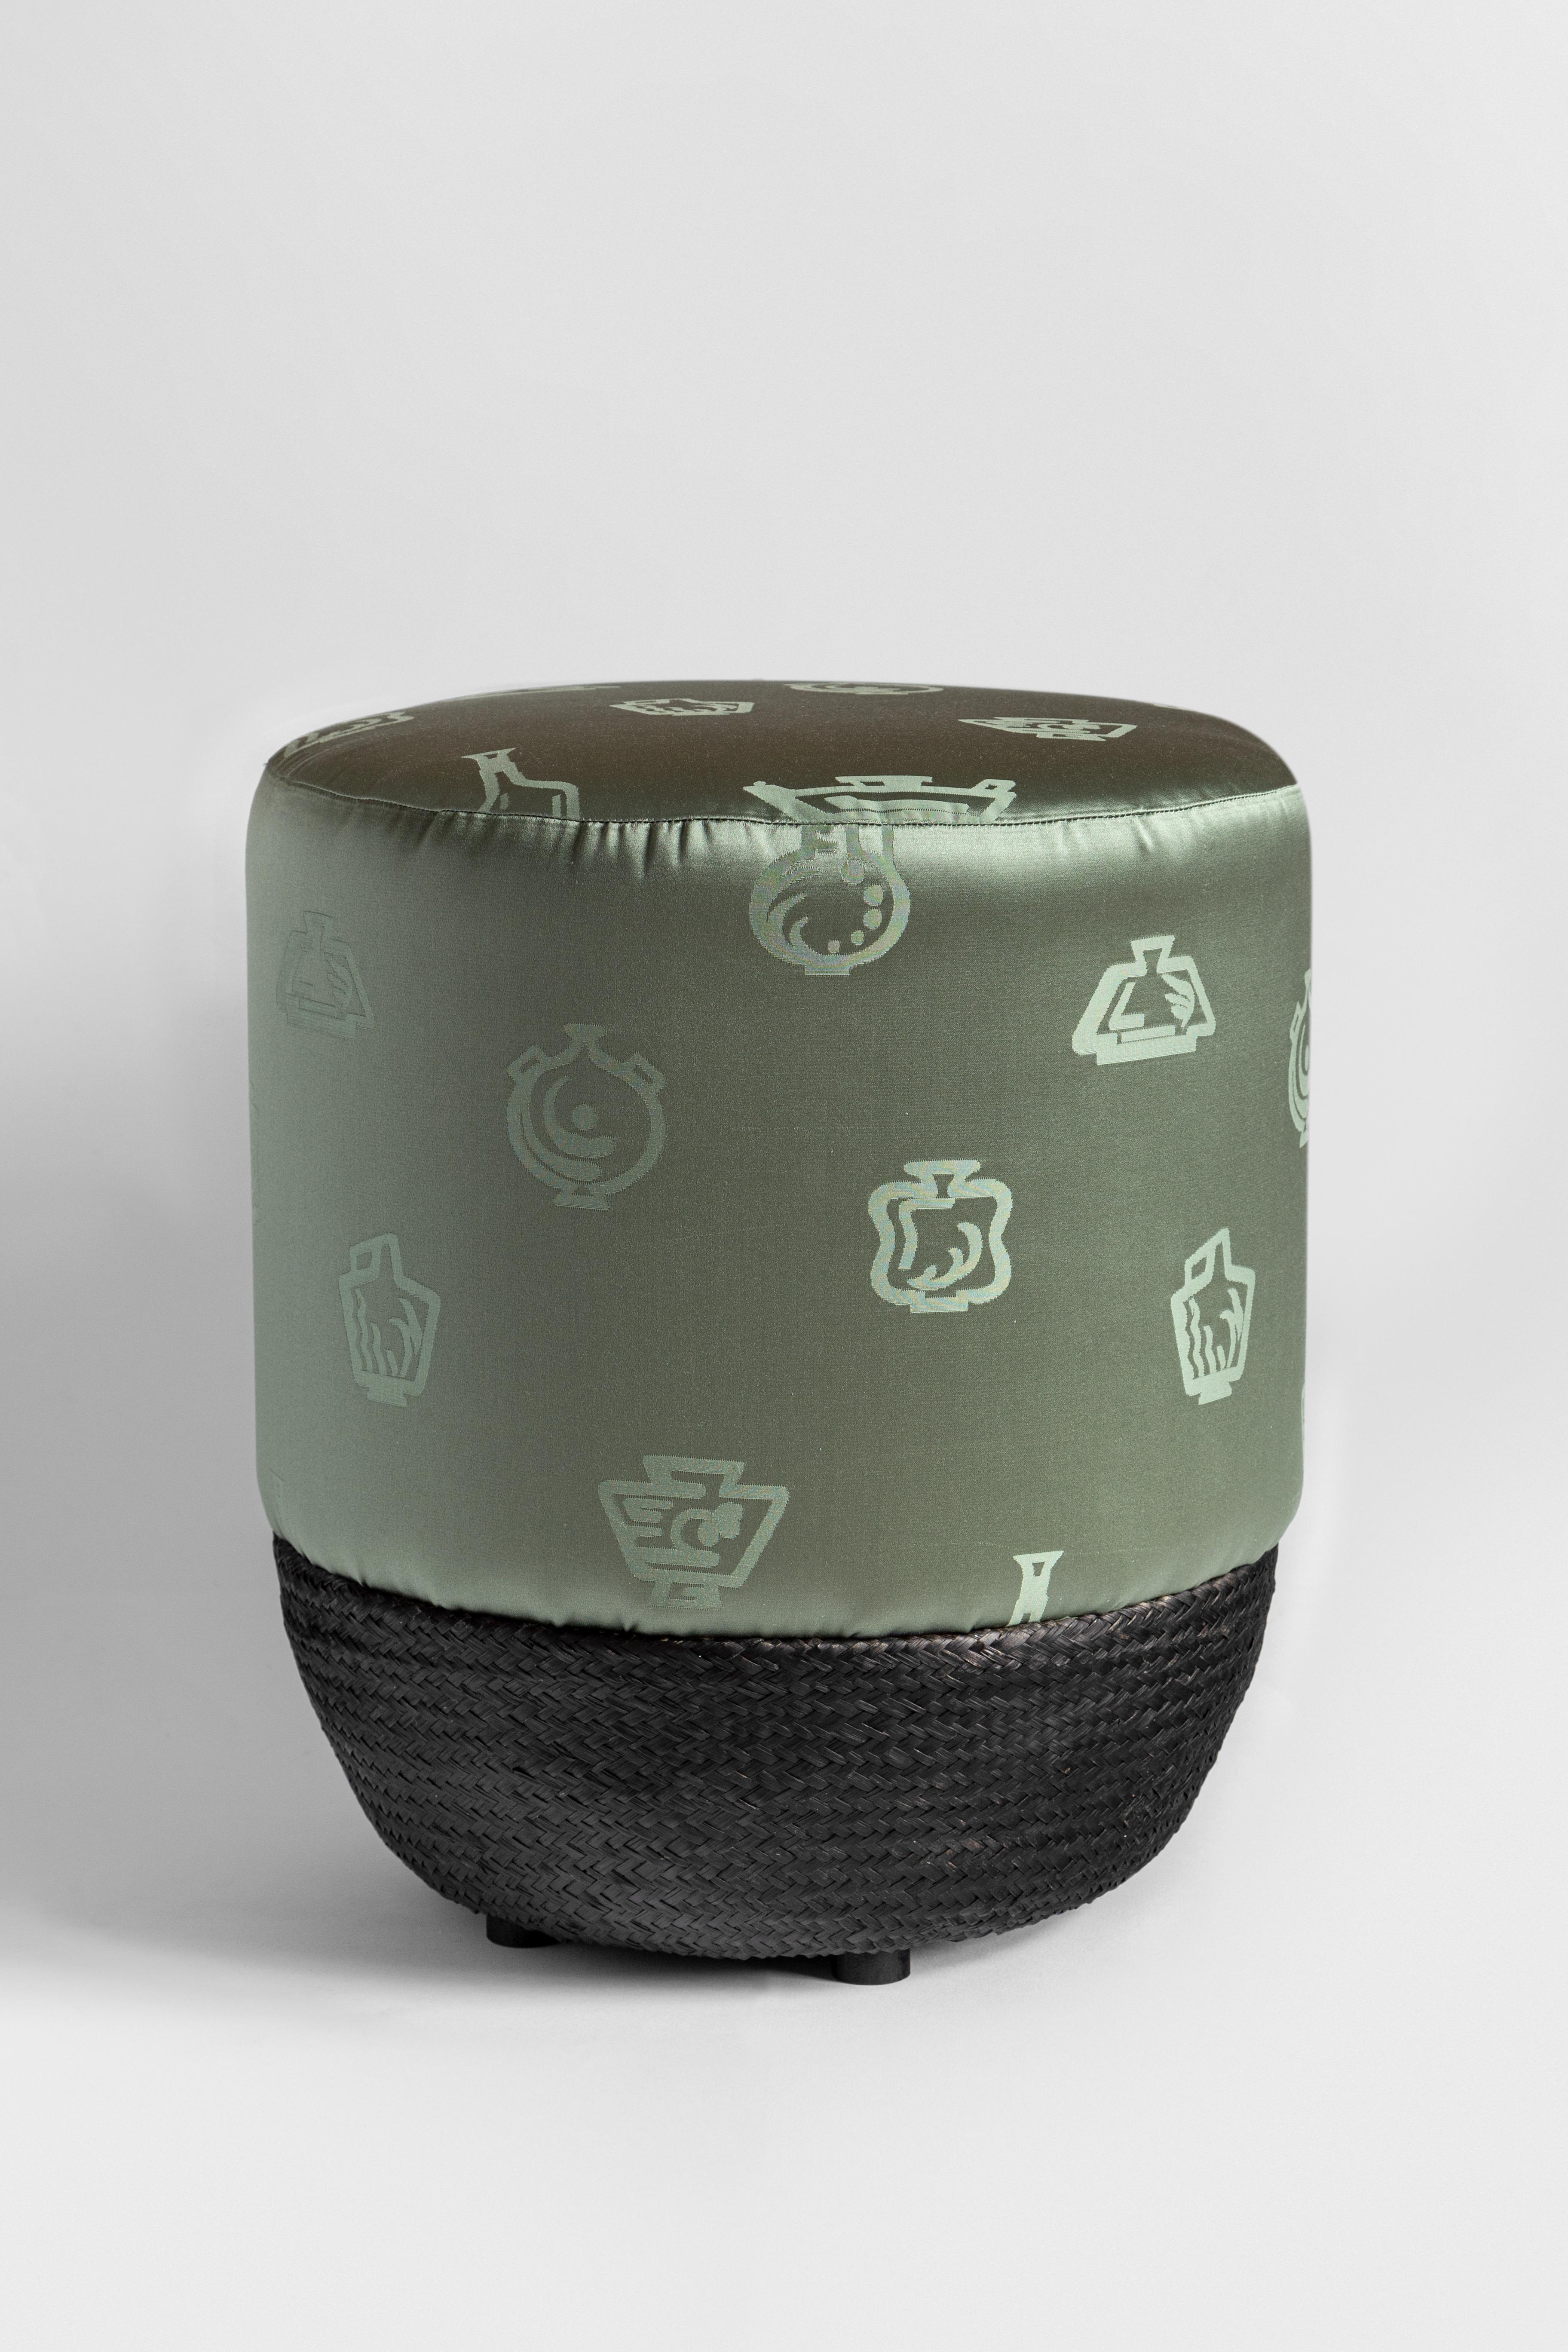 This sage-green pouf is made of two materials: a glossy, silk upholstered top embellished with a geometric print and a dark-hued, cotton-covered bottom intertwined to achieve the net-like texture. This comfortable yet timeless stool is one of Gio